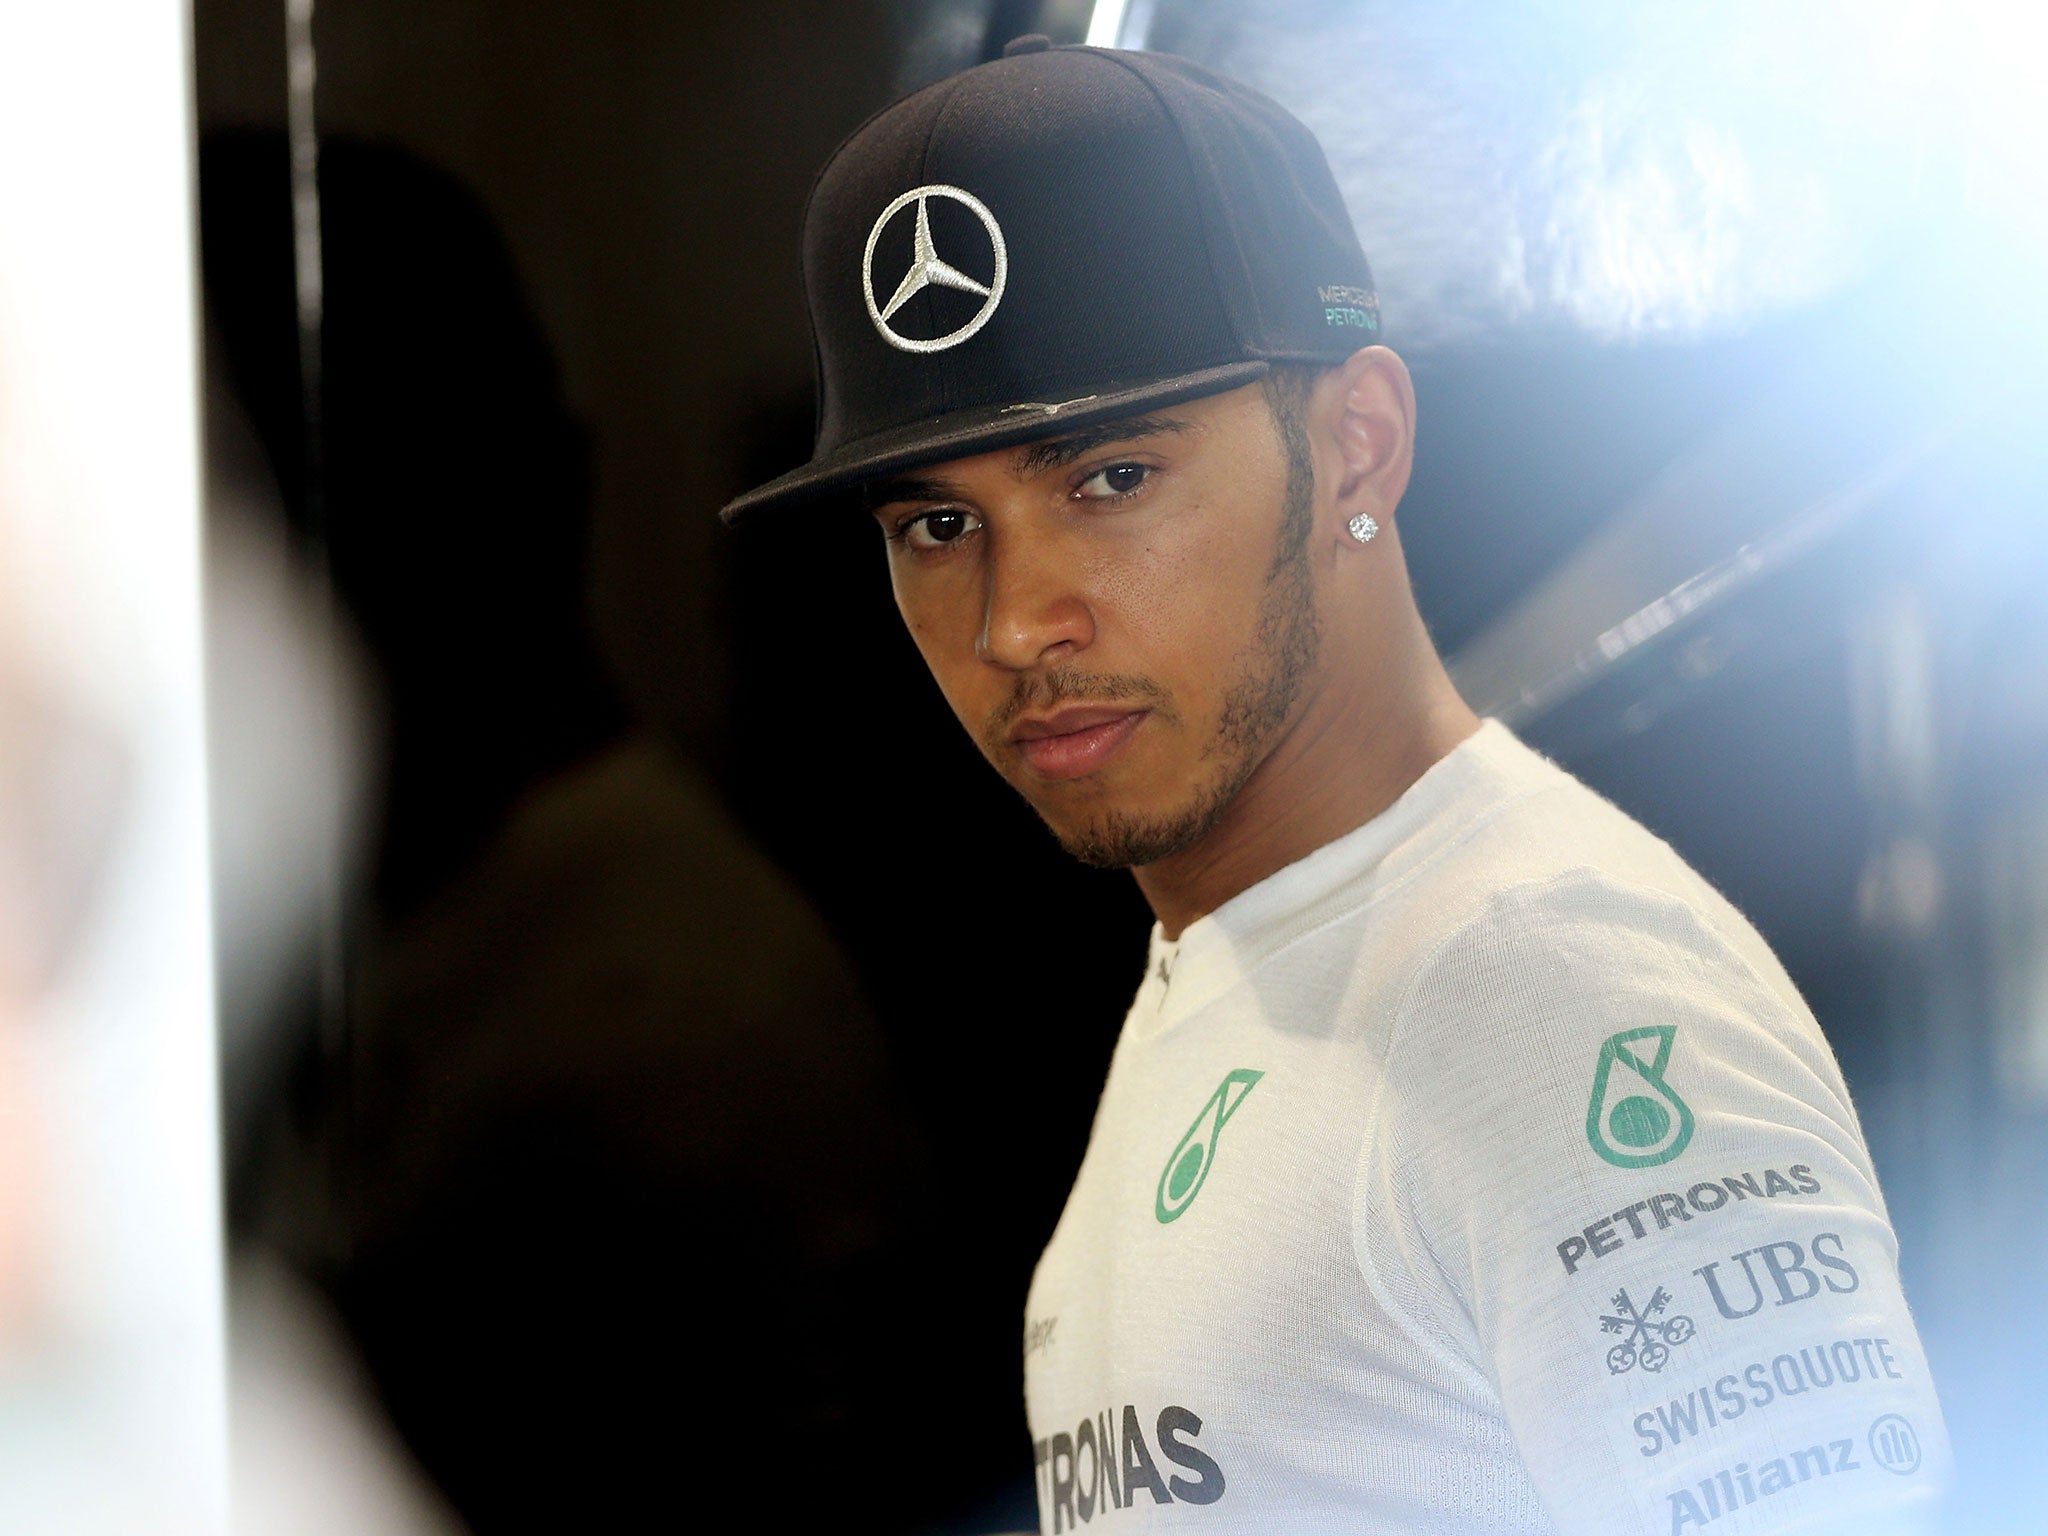 Lewis Hamilton ended Friday as the fastest man of all once again